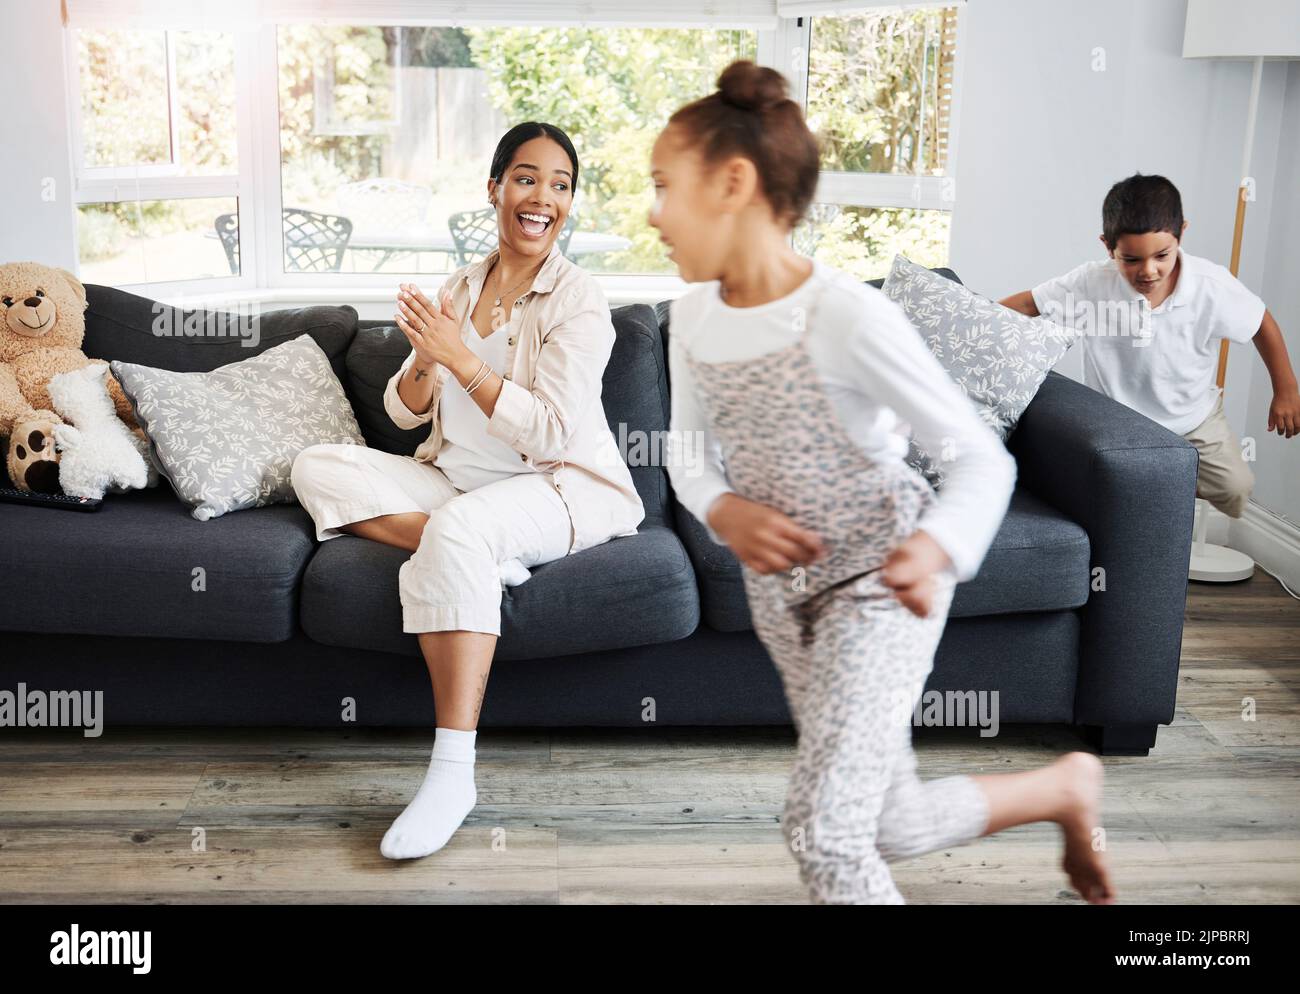 Playing, running and young children excited indoors with a smiling mother watching on a couch. Happy family spending the day together indoors while Stock Photo